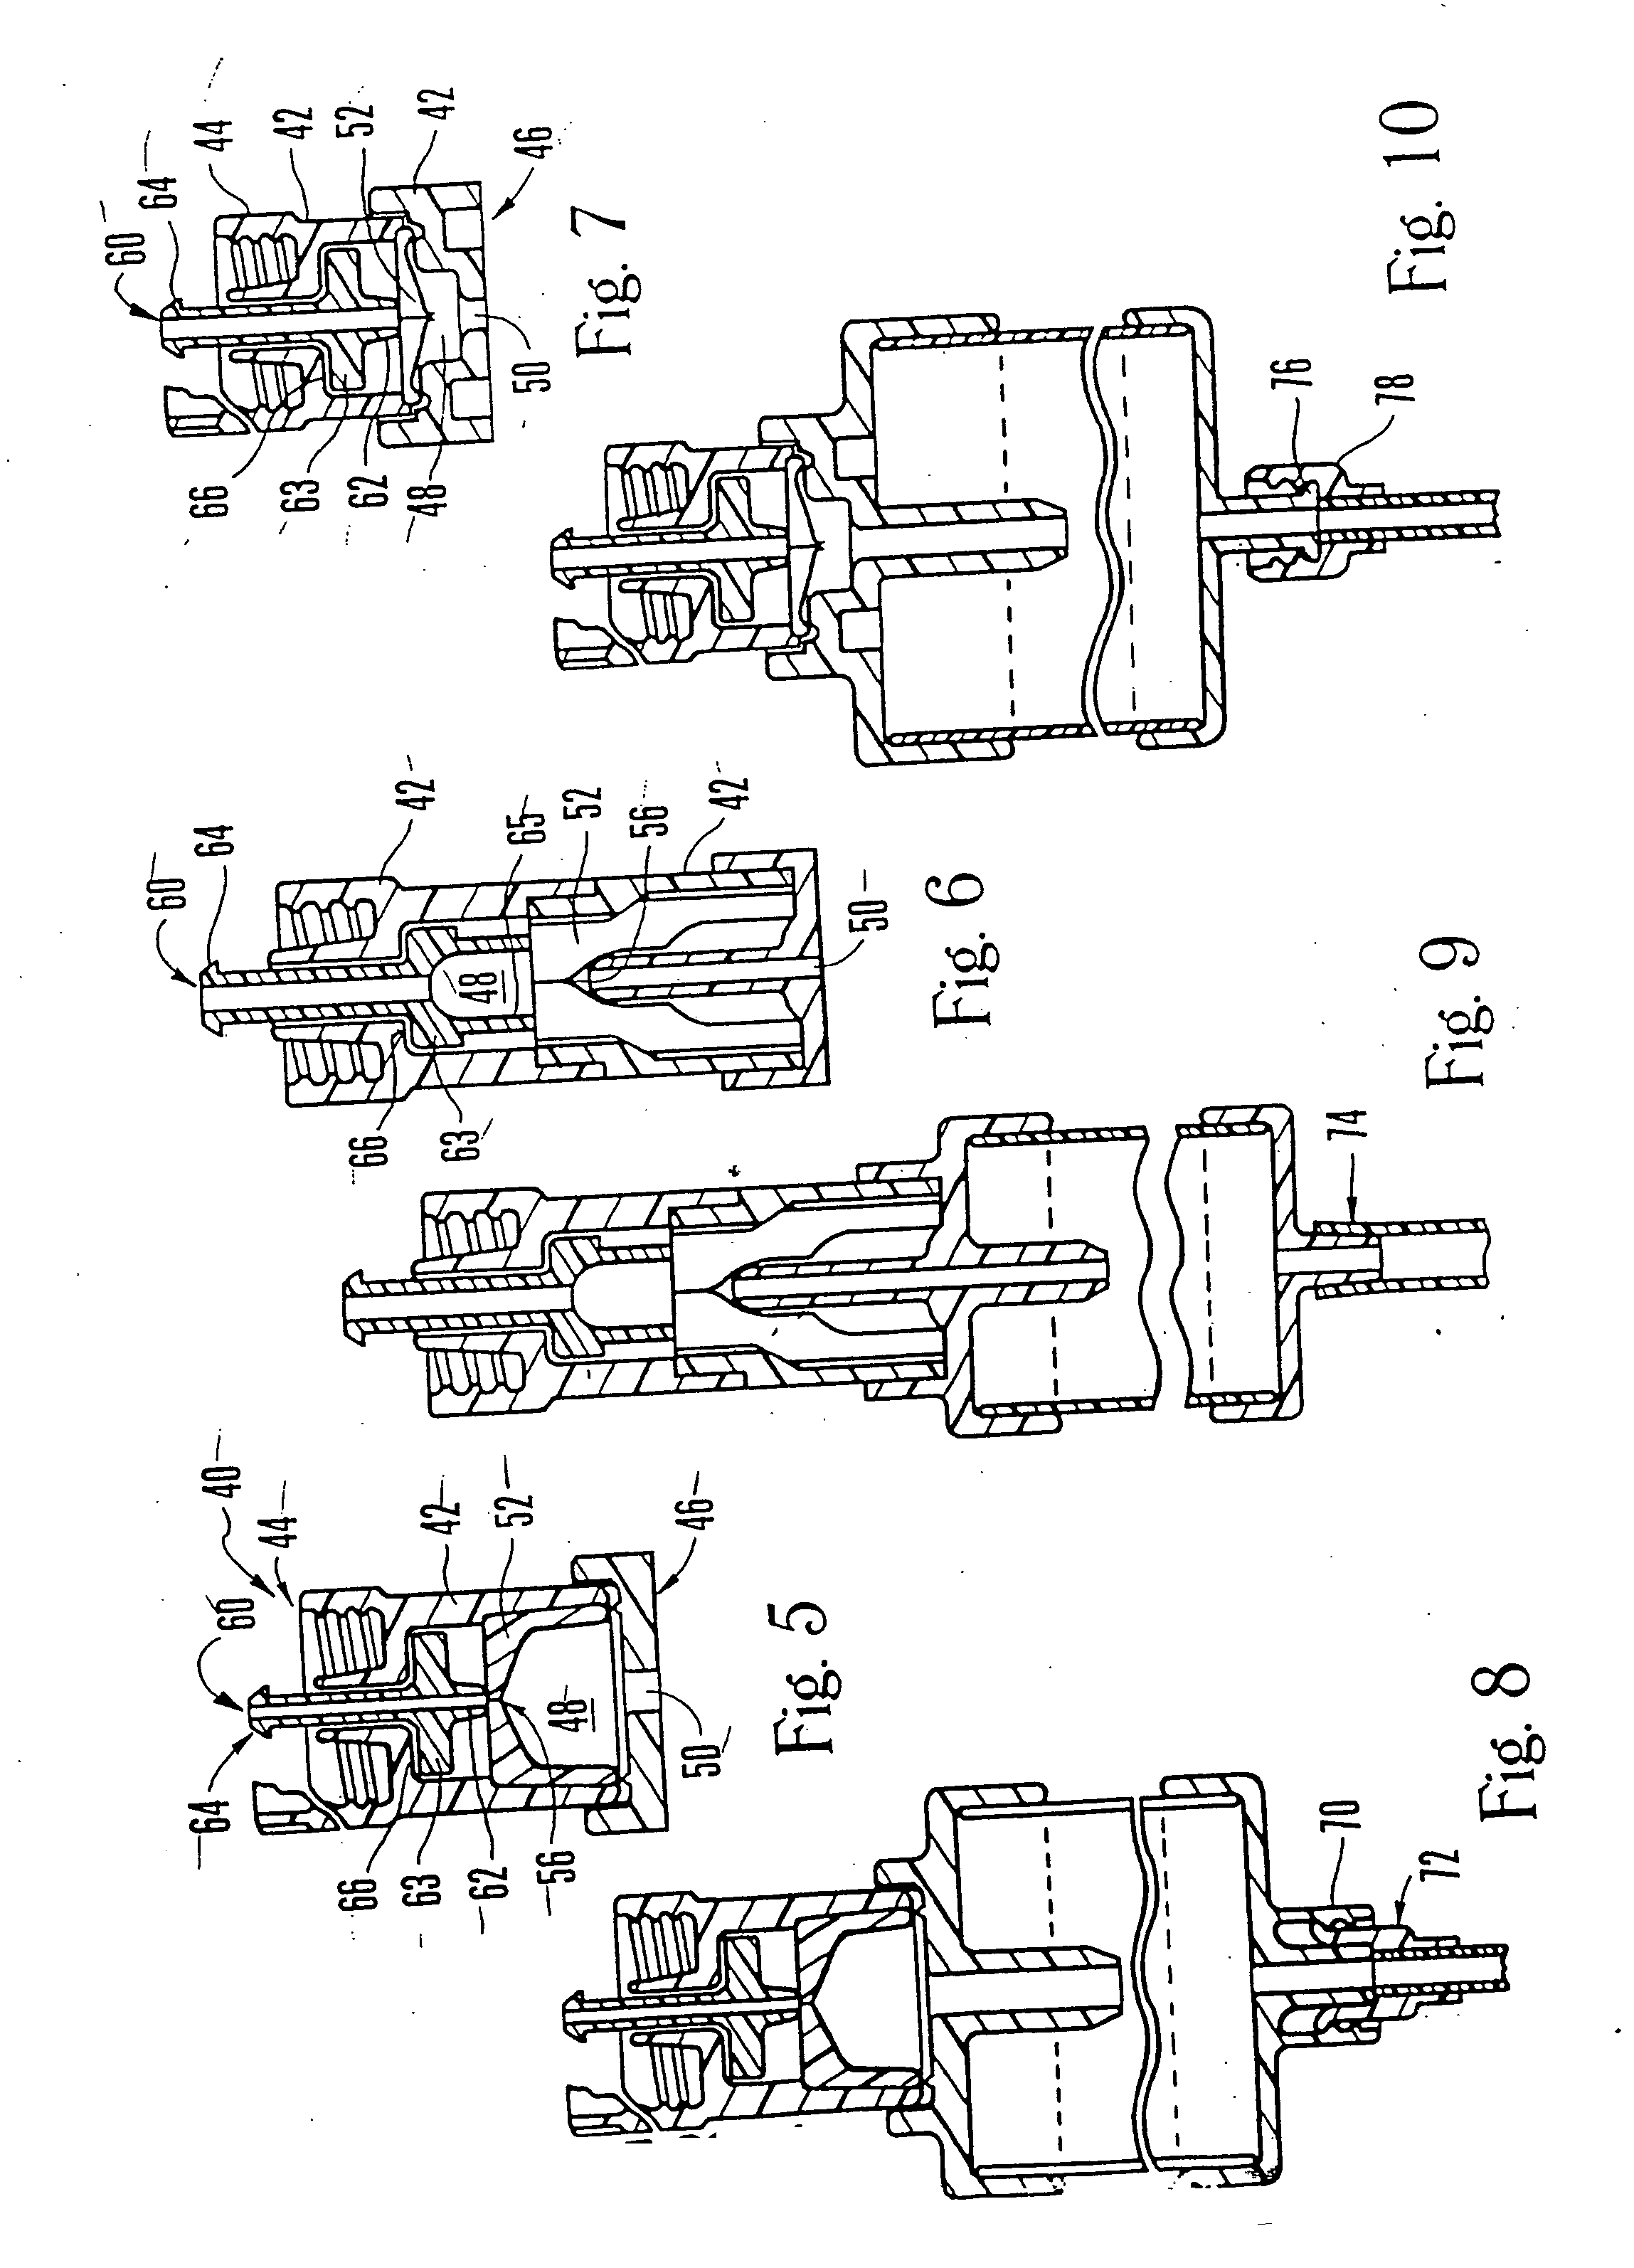 Spikeless connection and drip chamber with valve